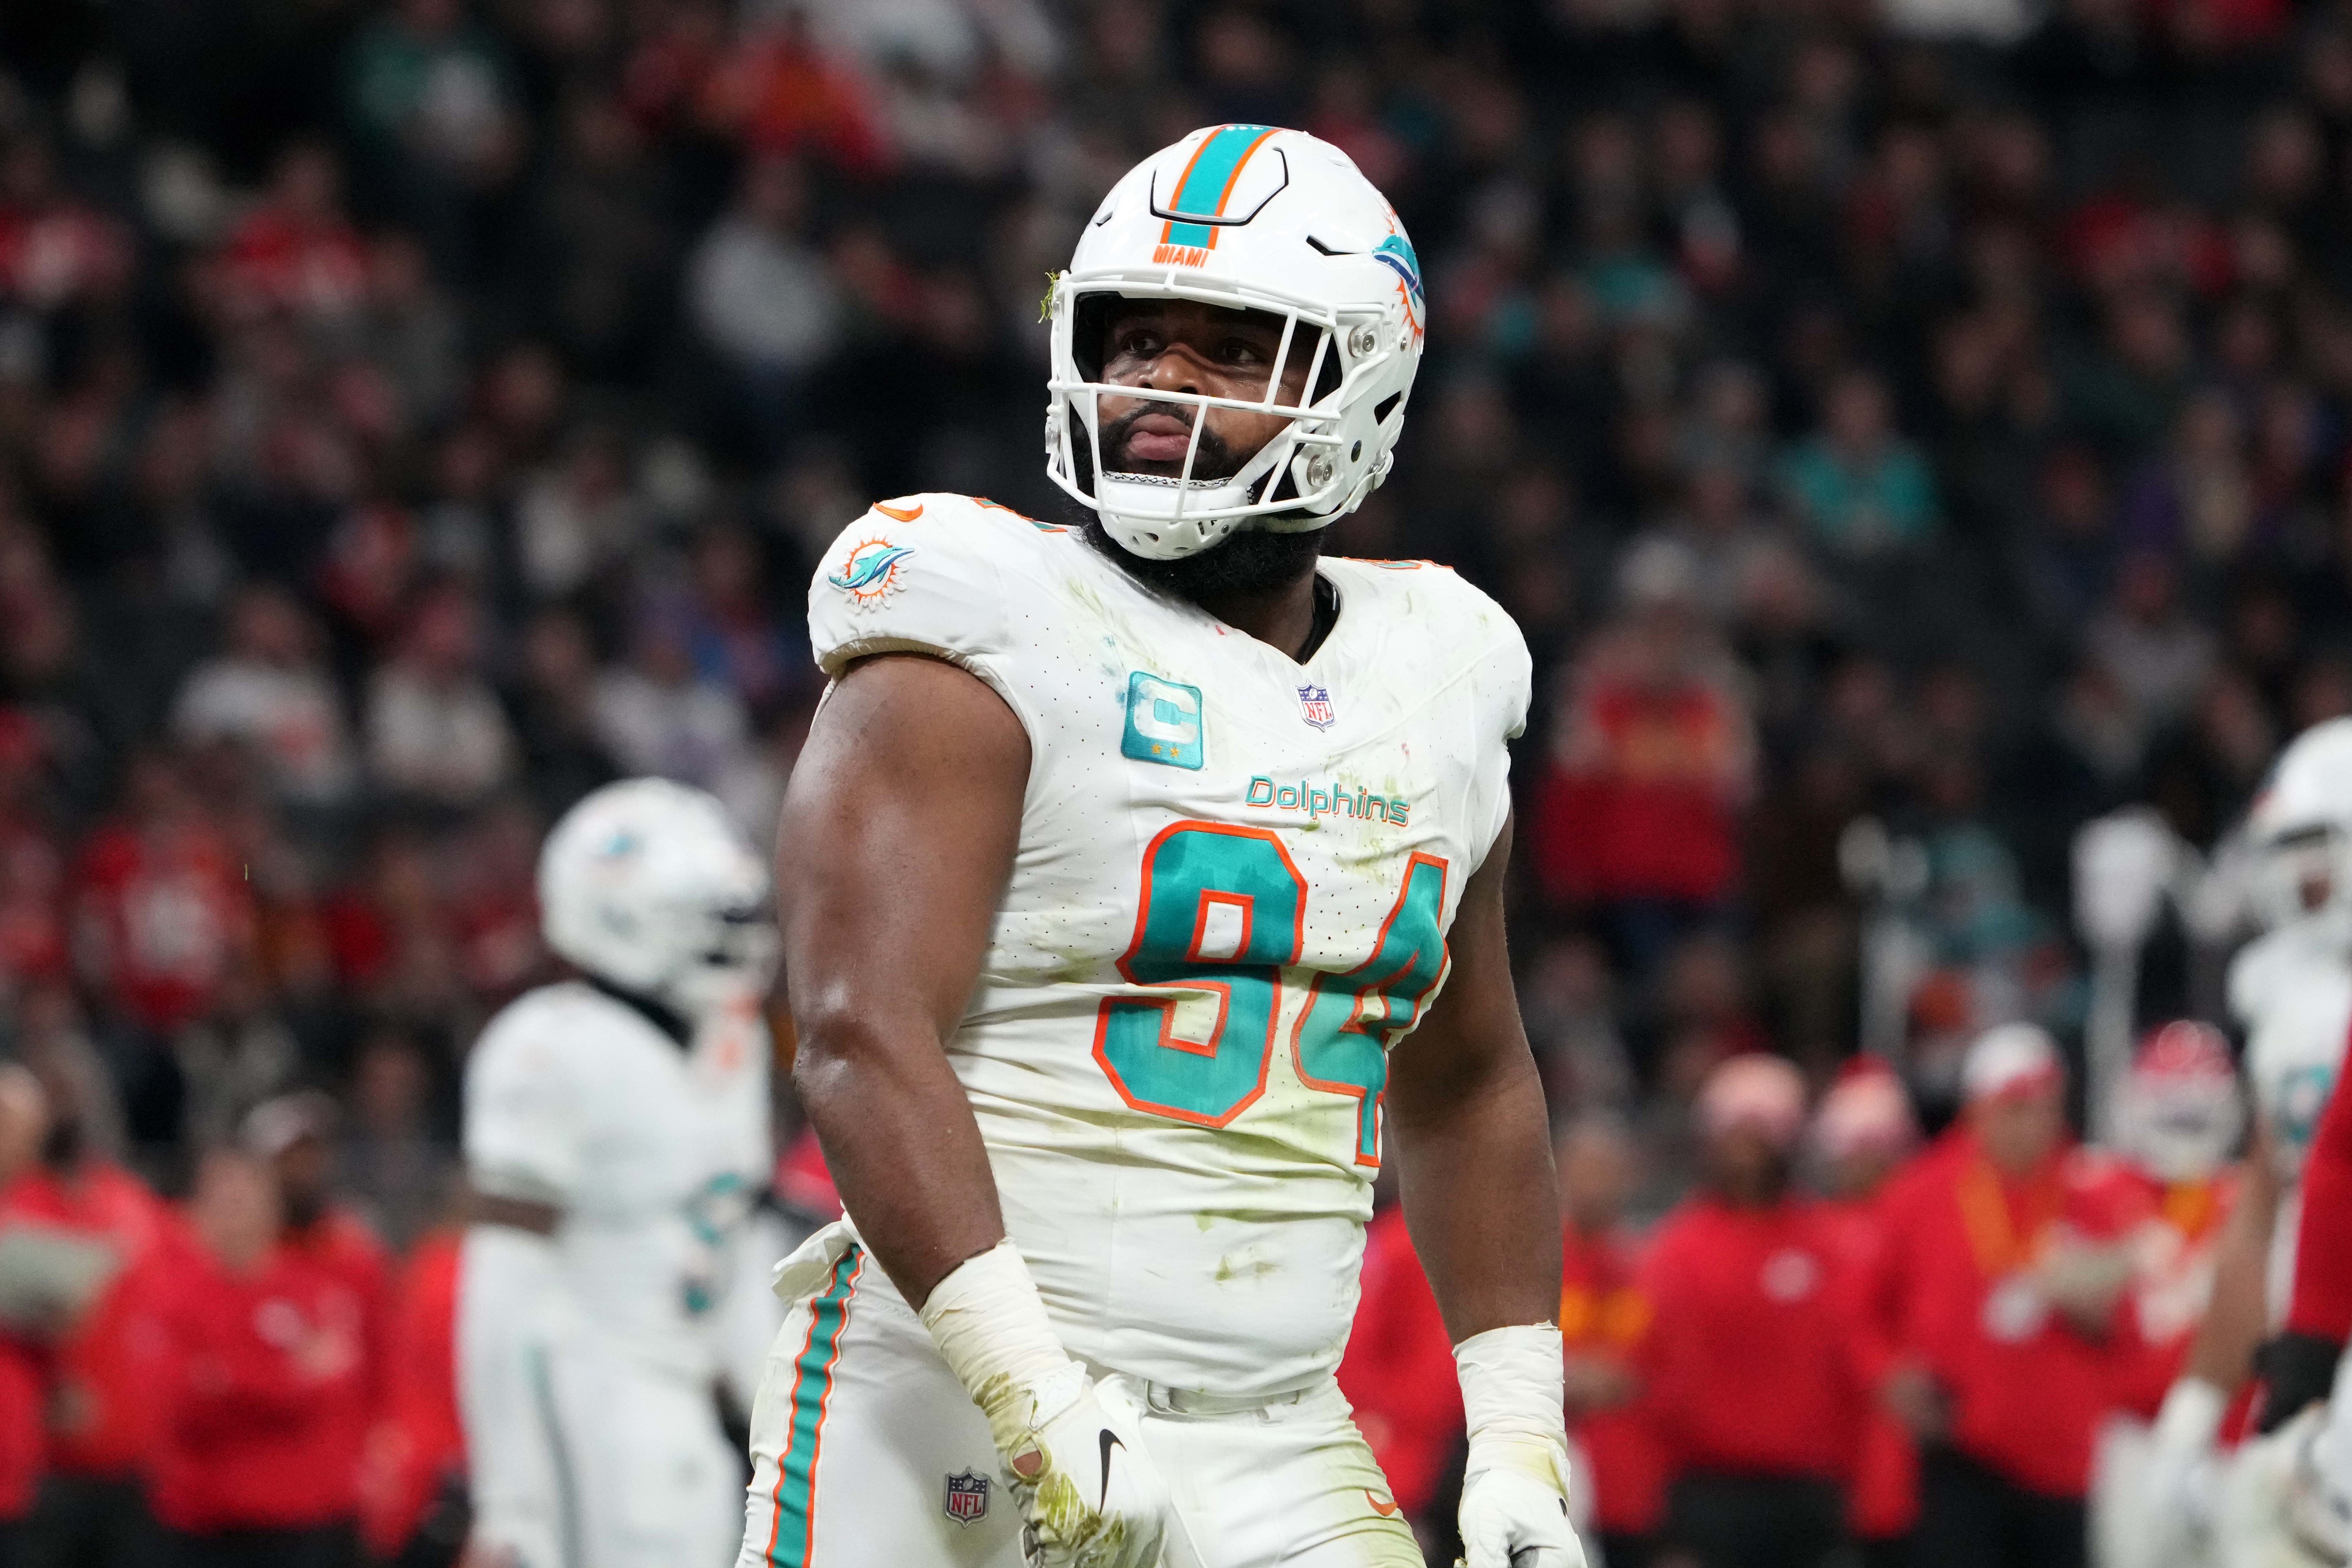 New Las Vegas Raiders defensive tackle Christian Wilkins is the perfect addition to the team's defensive line.